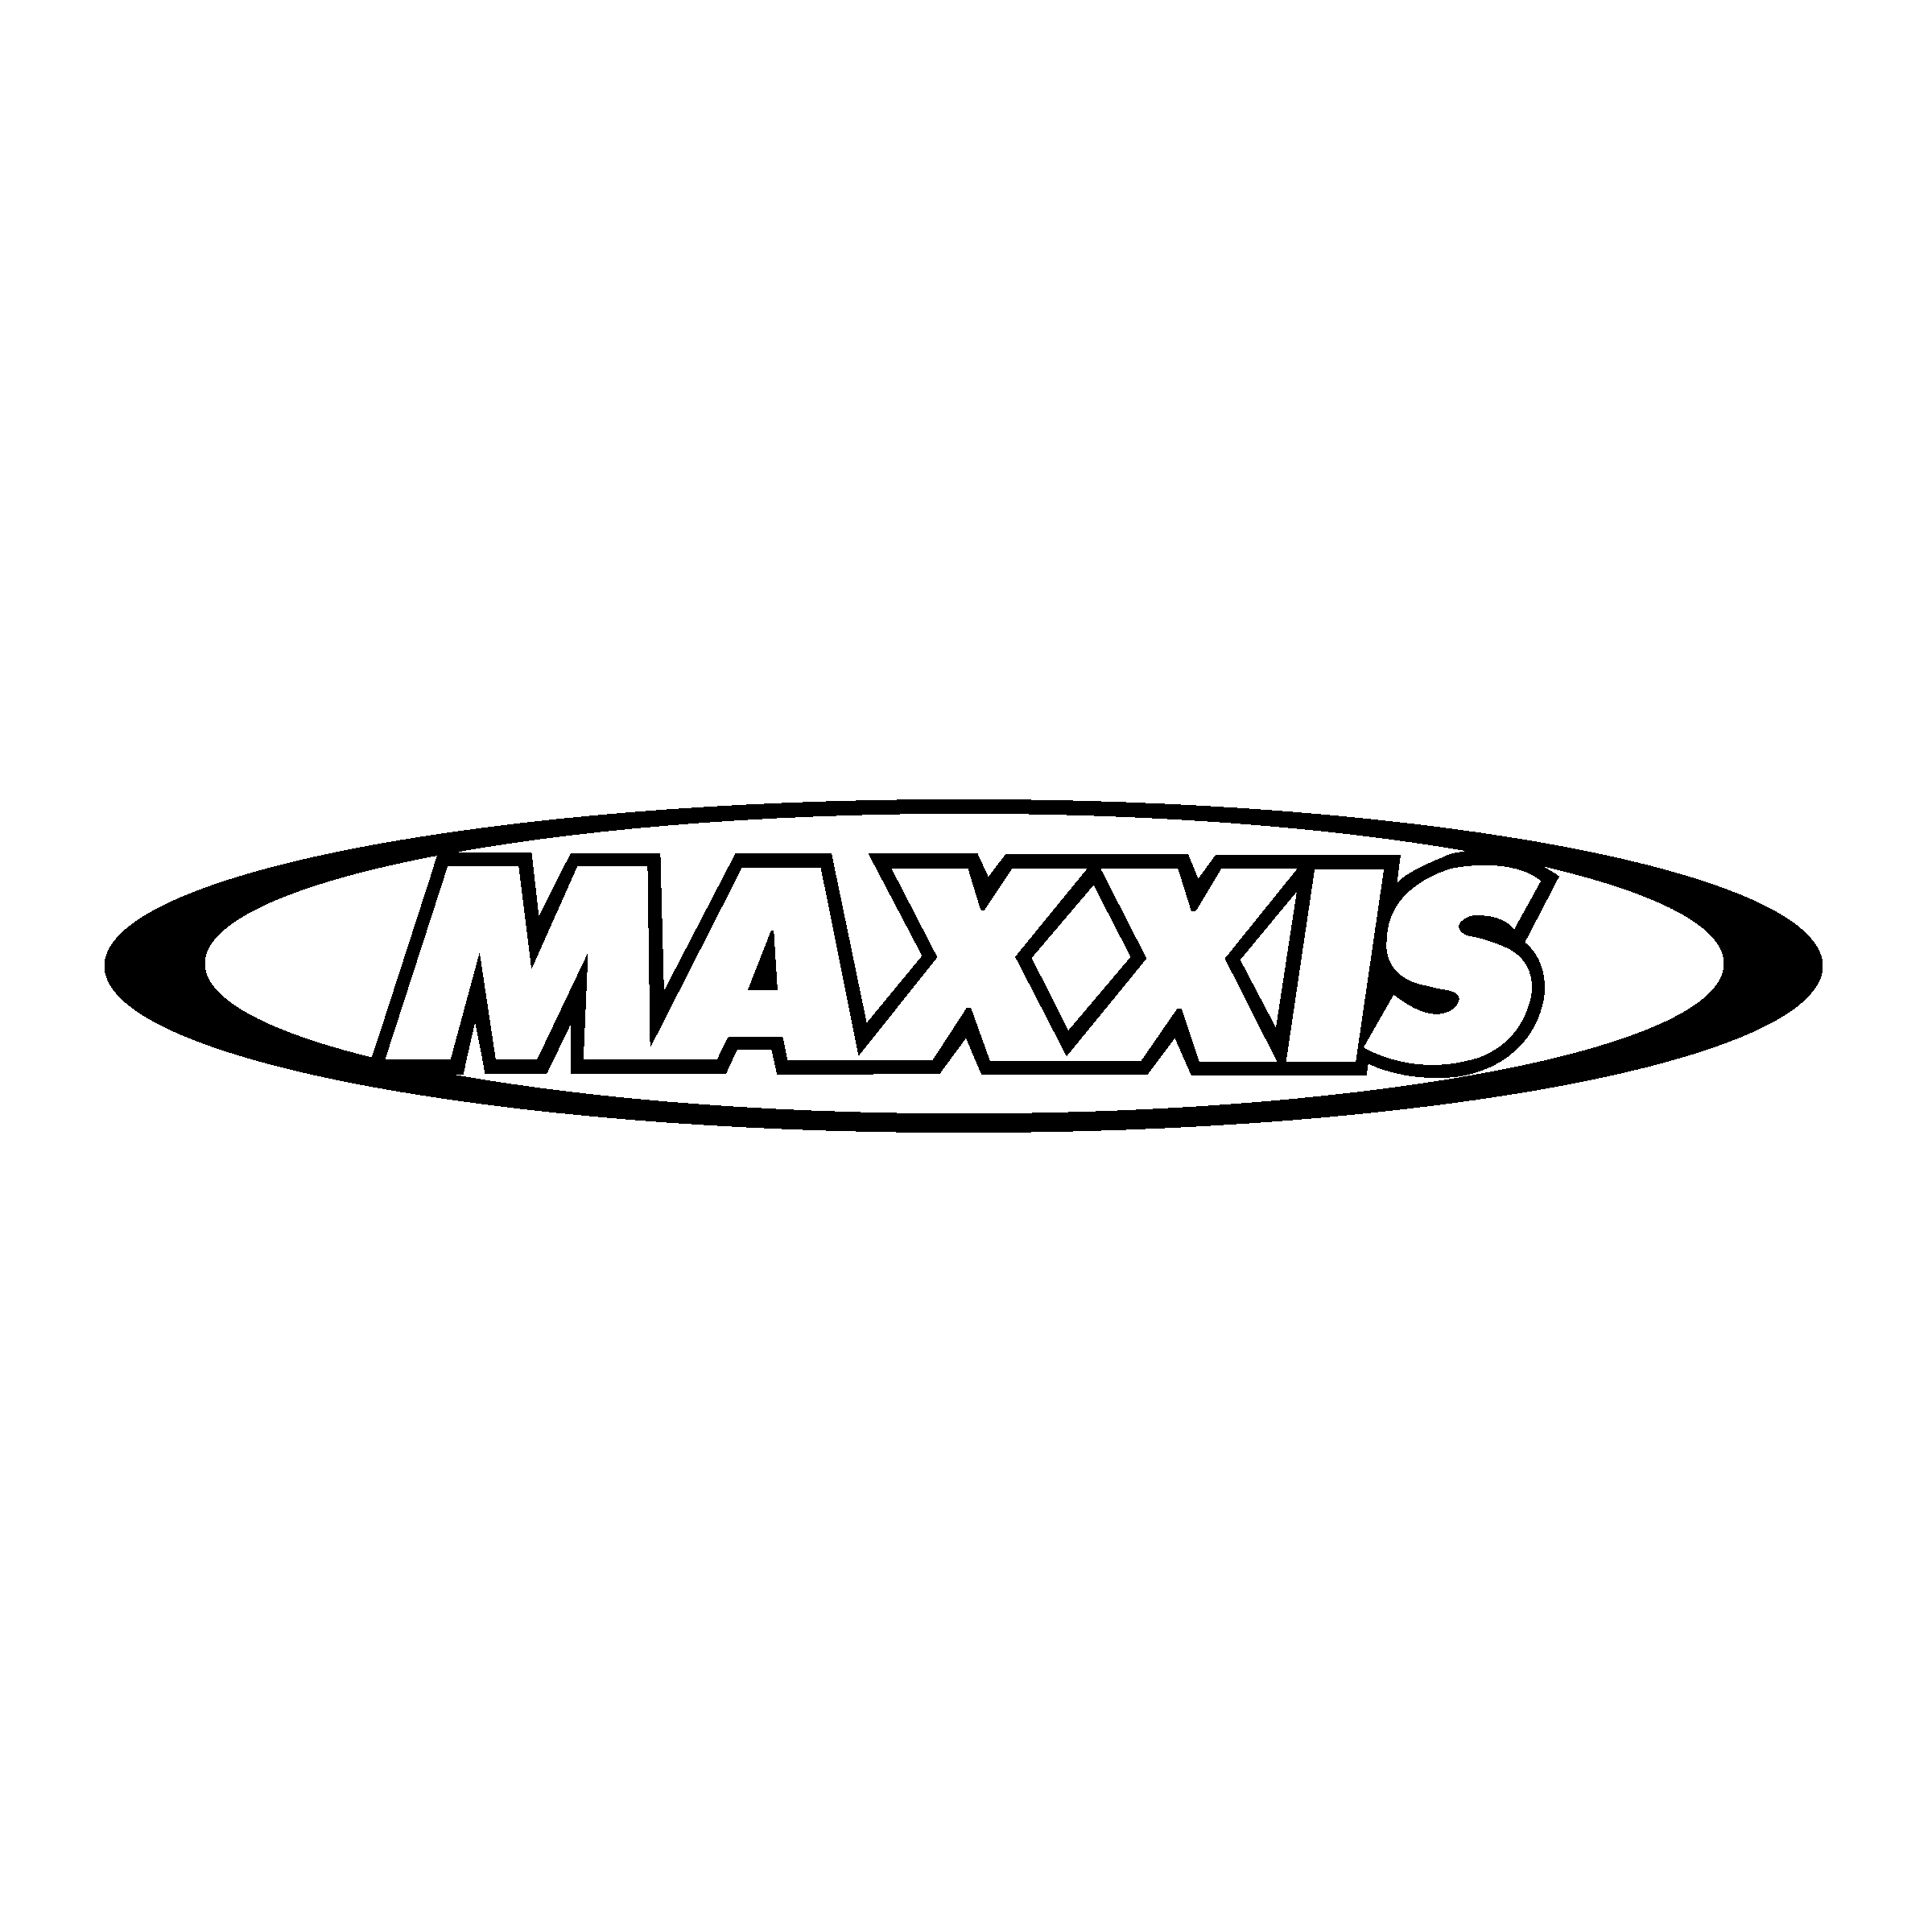 Maxxis Logo - Maxxis Logo PNG Transparent & SVG Vector - Freebie Supply